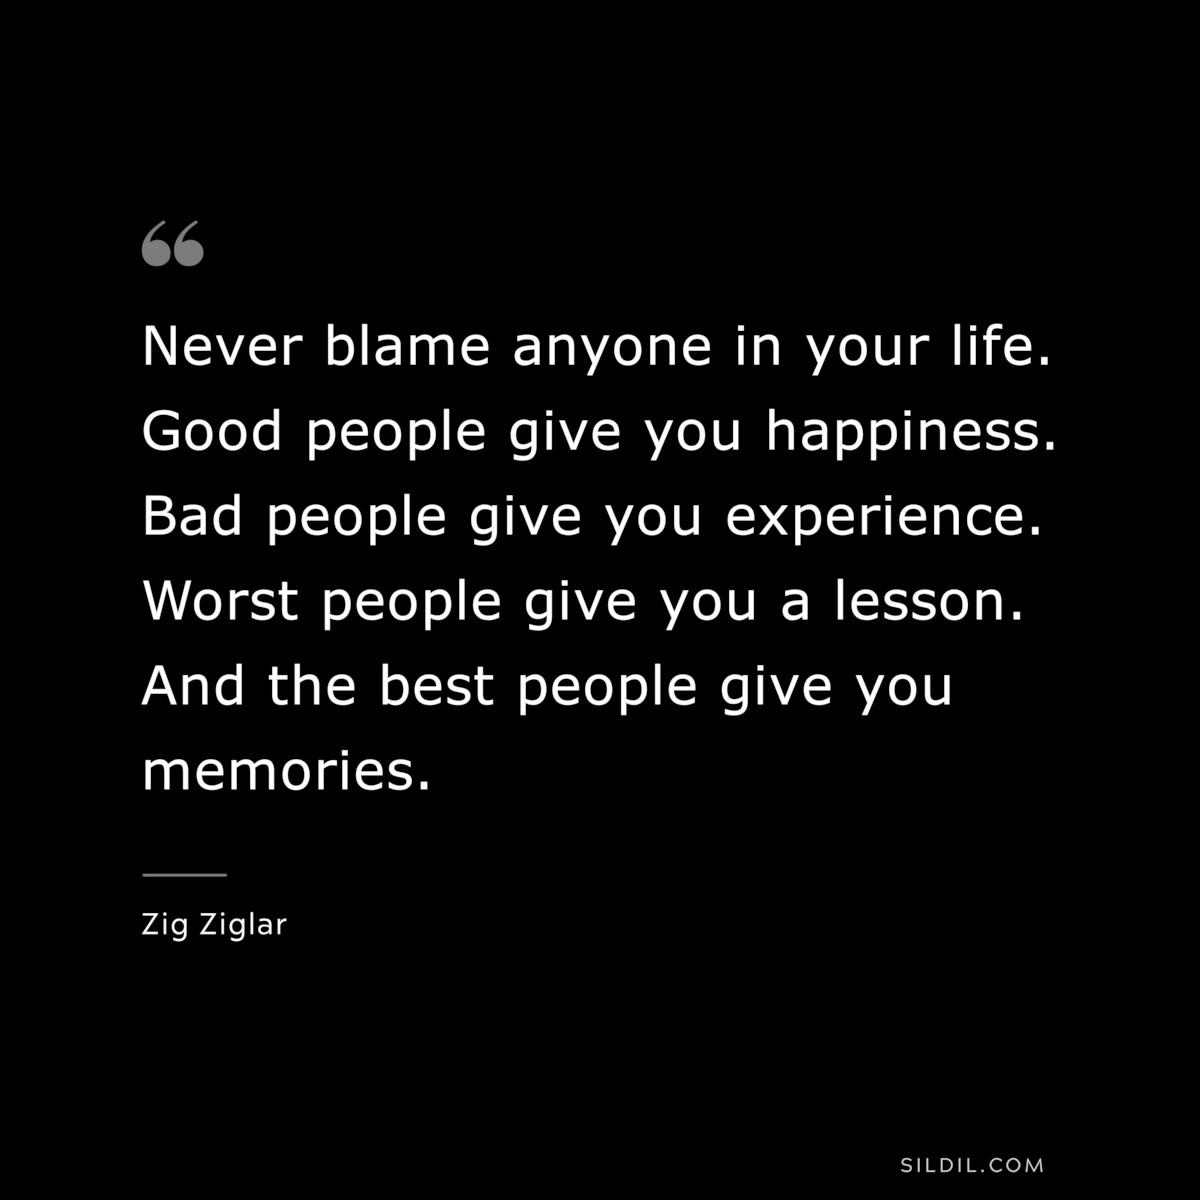 Never blame anyone in your life. Good people give you happiness. Bad people give you experience. Worst people give you a lesson. And the best people give you memories. ― Zig Ziglar